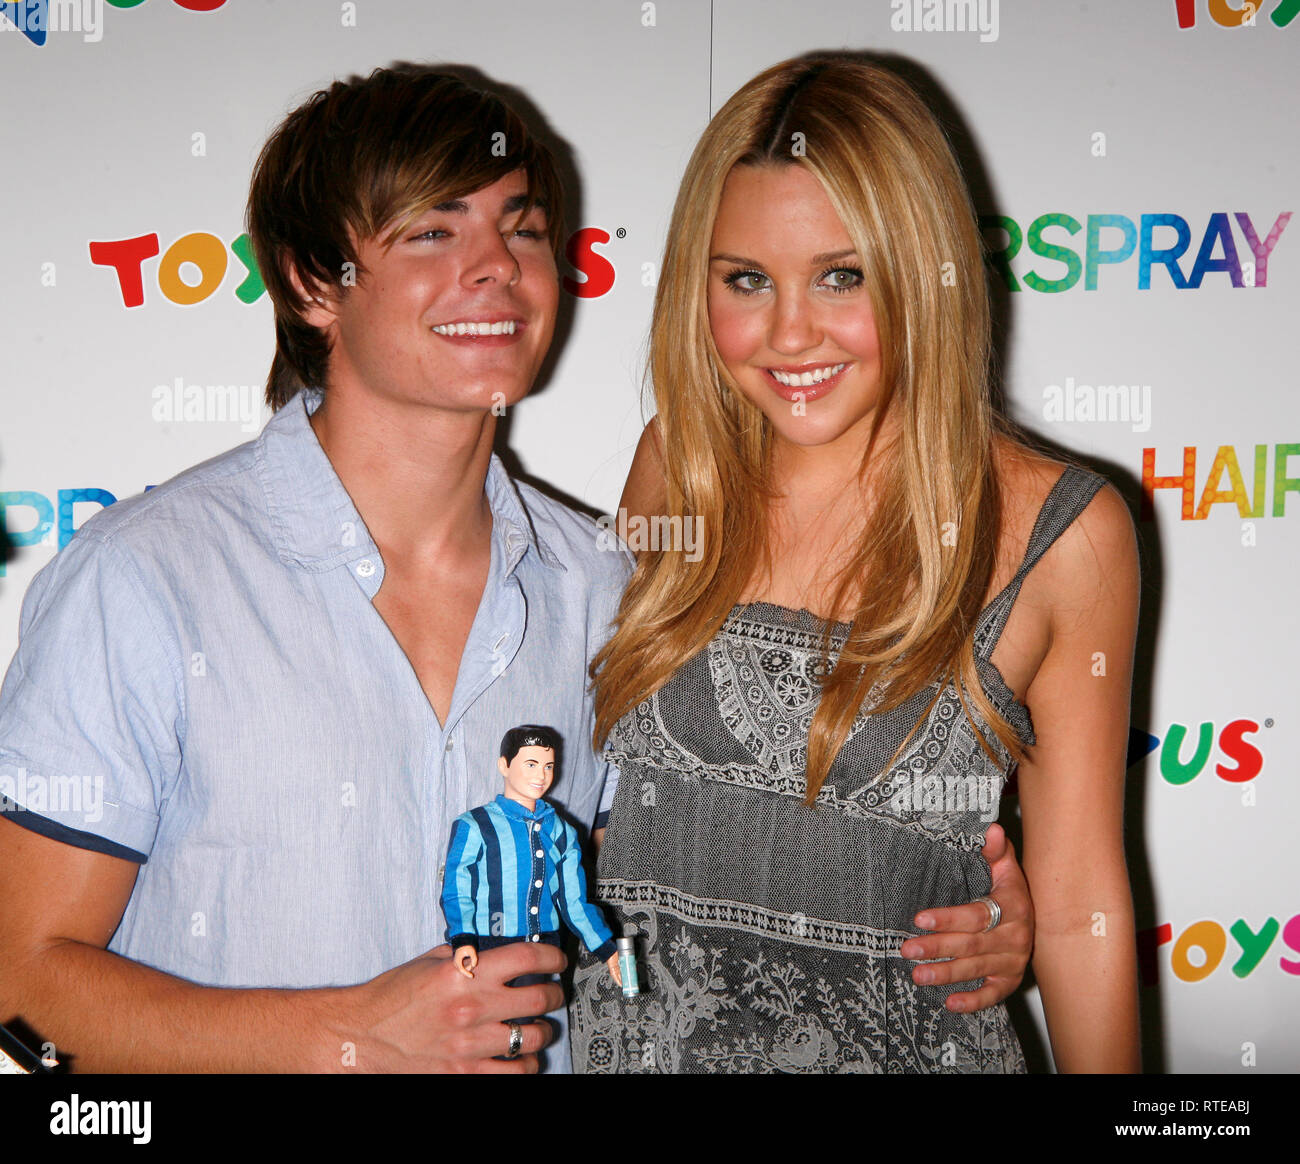 ***FILE PHOTO*** Amanda Bynes Returns To Mental Health Facility After Relapse. of the 'HAIRSPRAY' movie cast helps raise the curtain on the new Doll Line at Toys 'R' Us in Times Square, New York City. July 17, 2007 Credit: Walter McBride/MediaPunch Stock Photo